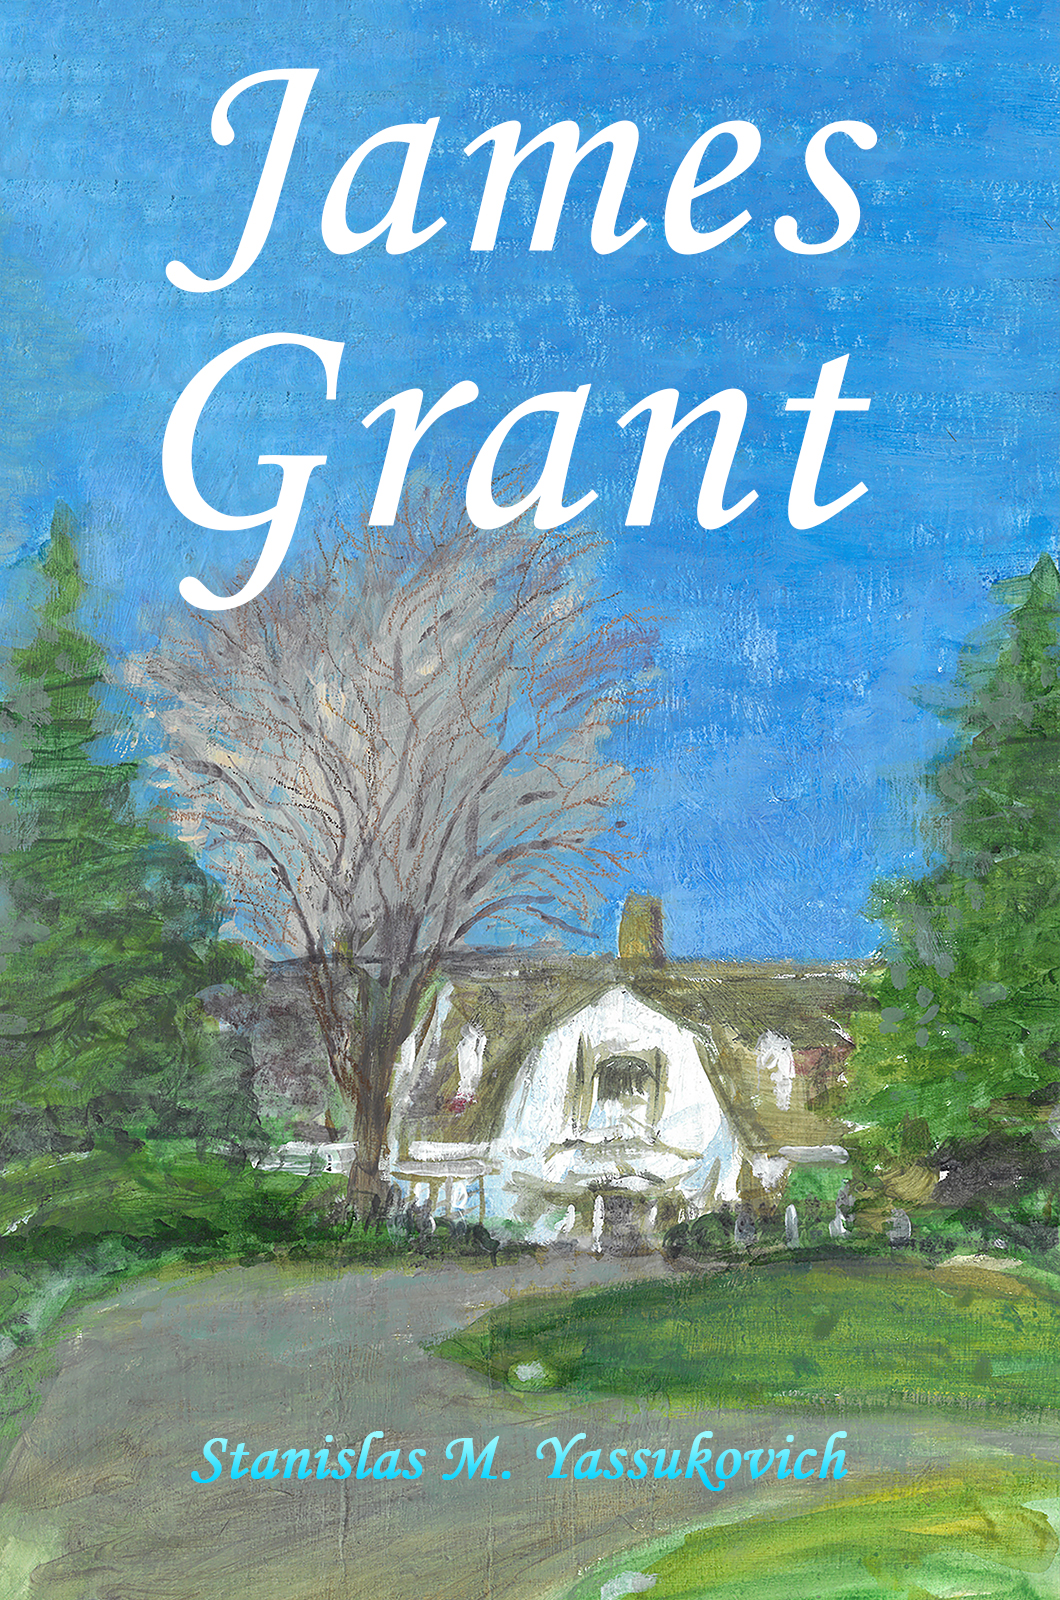 This image is the cover for the book James Grant